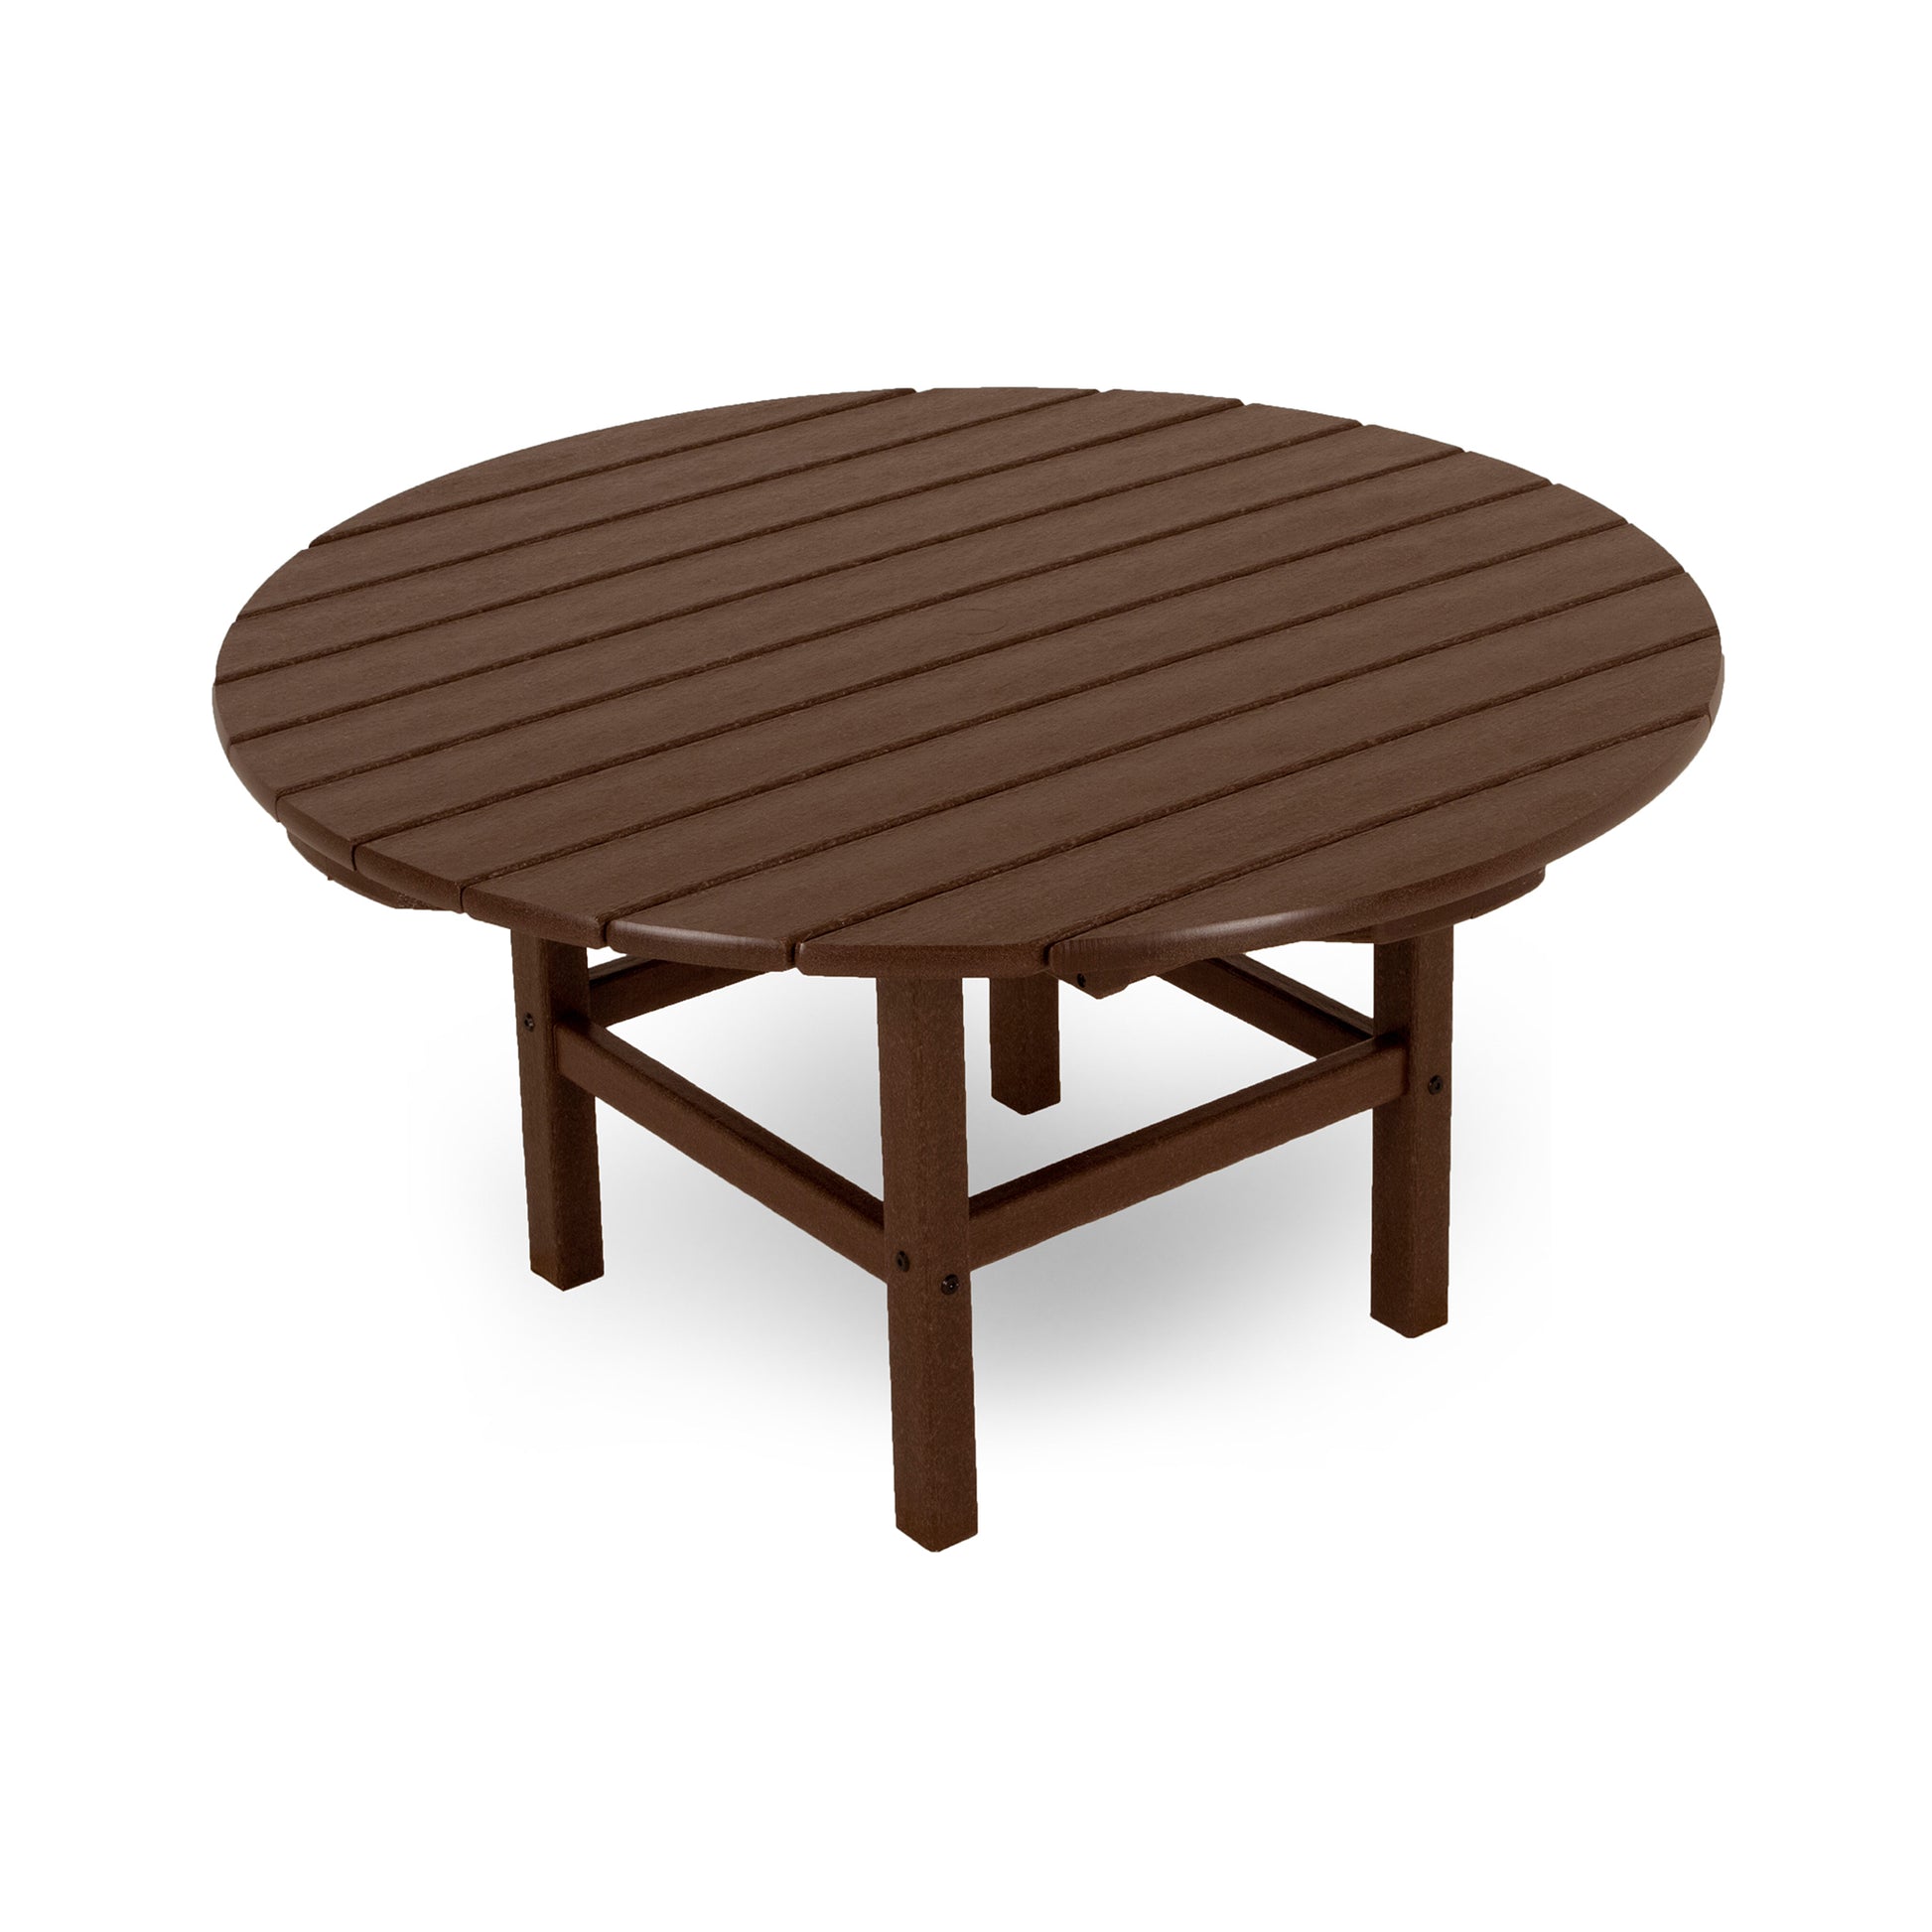 A round, brown POLYWOOD Outdoor 38" Conversation Table with a slatted top and sturdy legs, isolated on a white background.